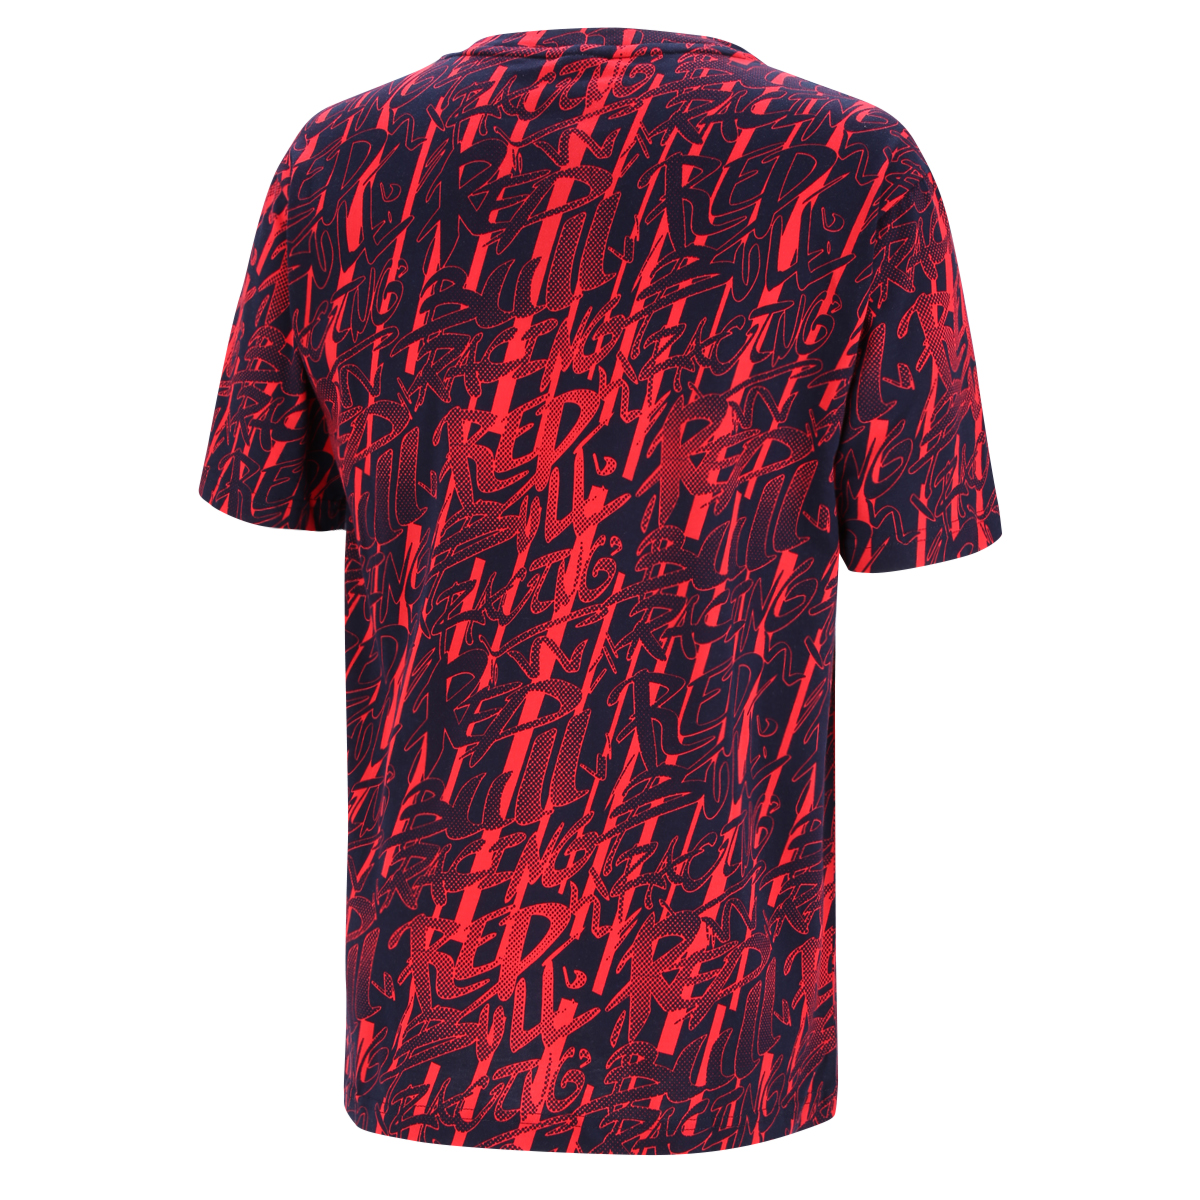 Remera Puma AOP Red Bull Racing,  image number null